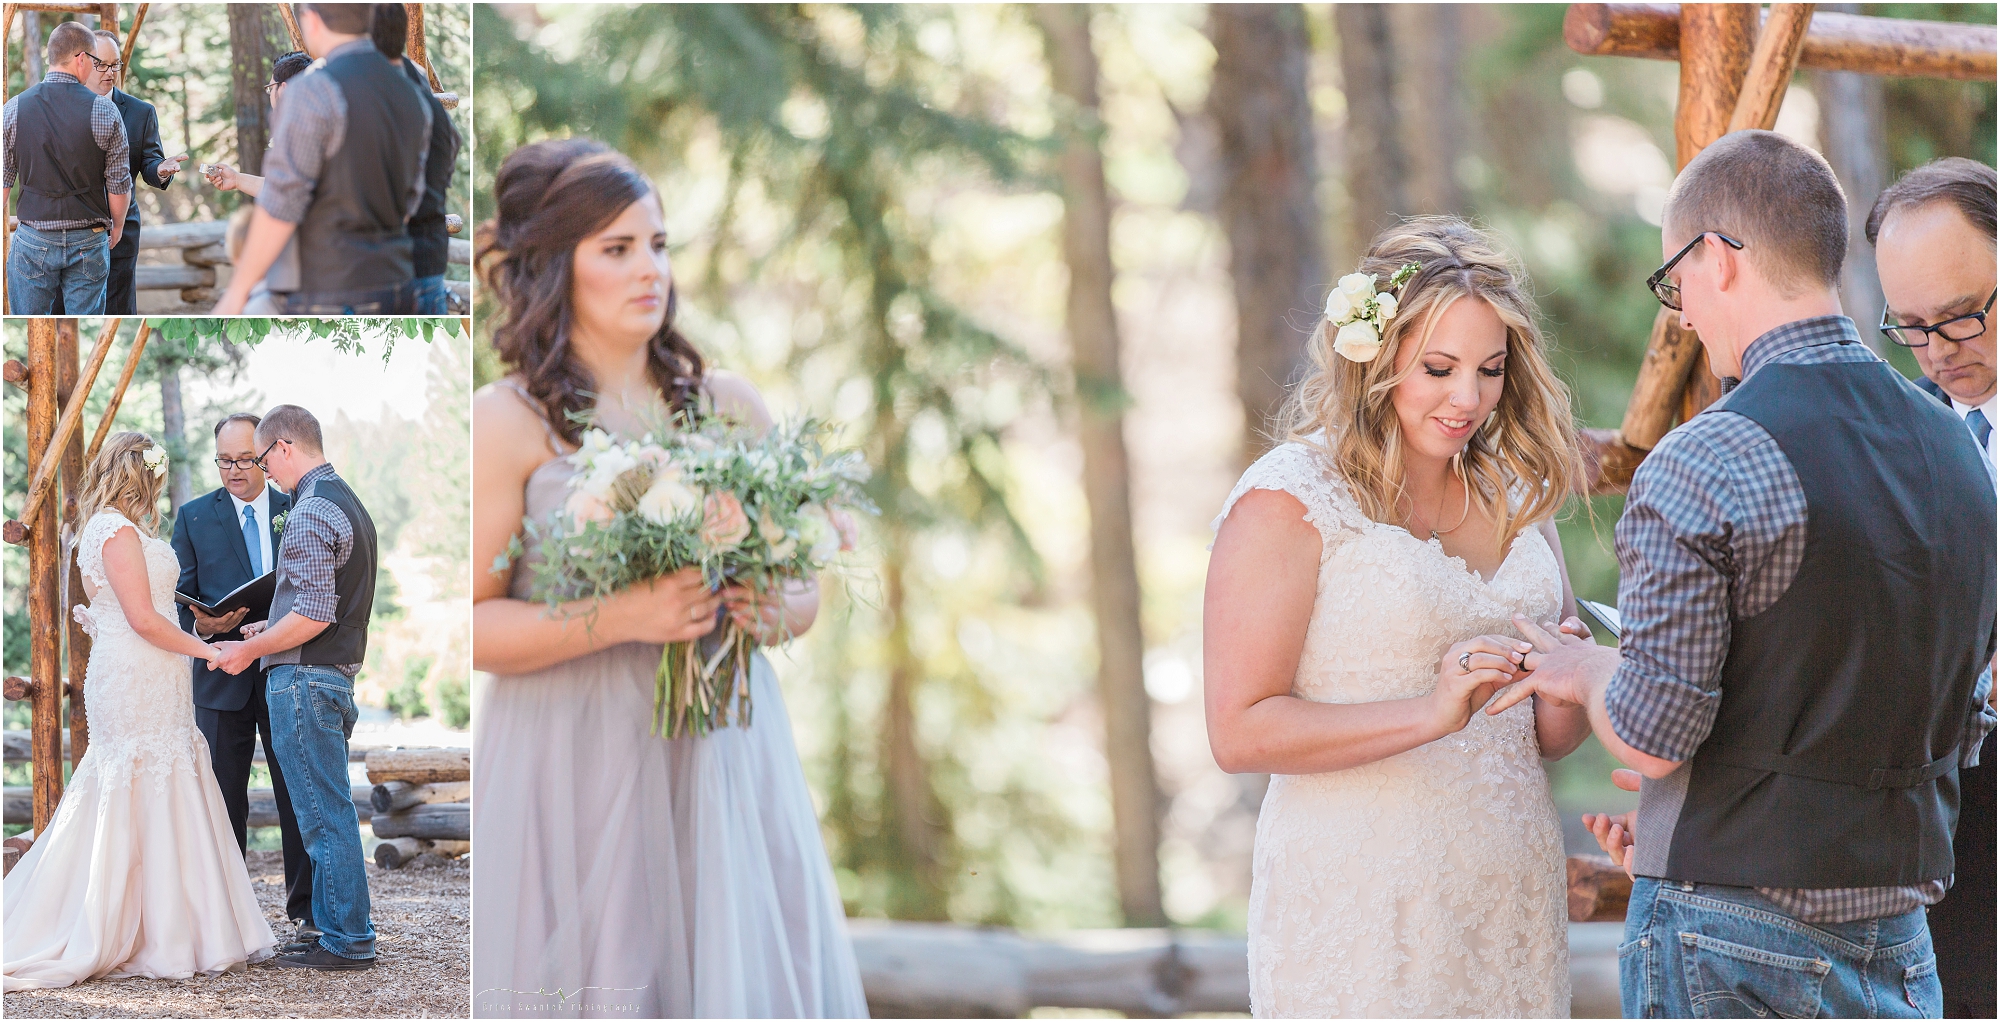 Exchanging of the rings during the outdoor ceremony at this Bend, Oregon wedding venue. 